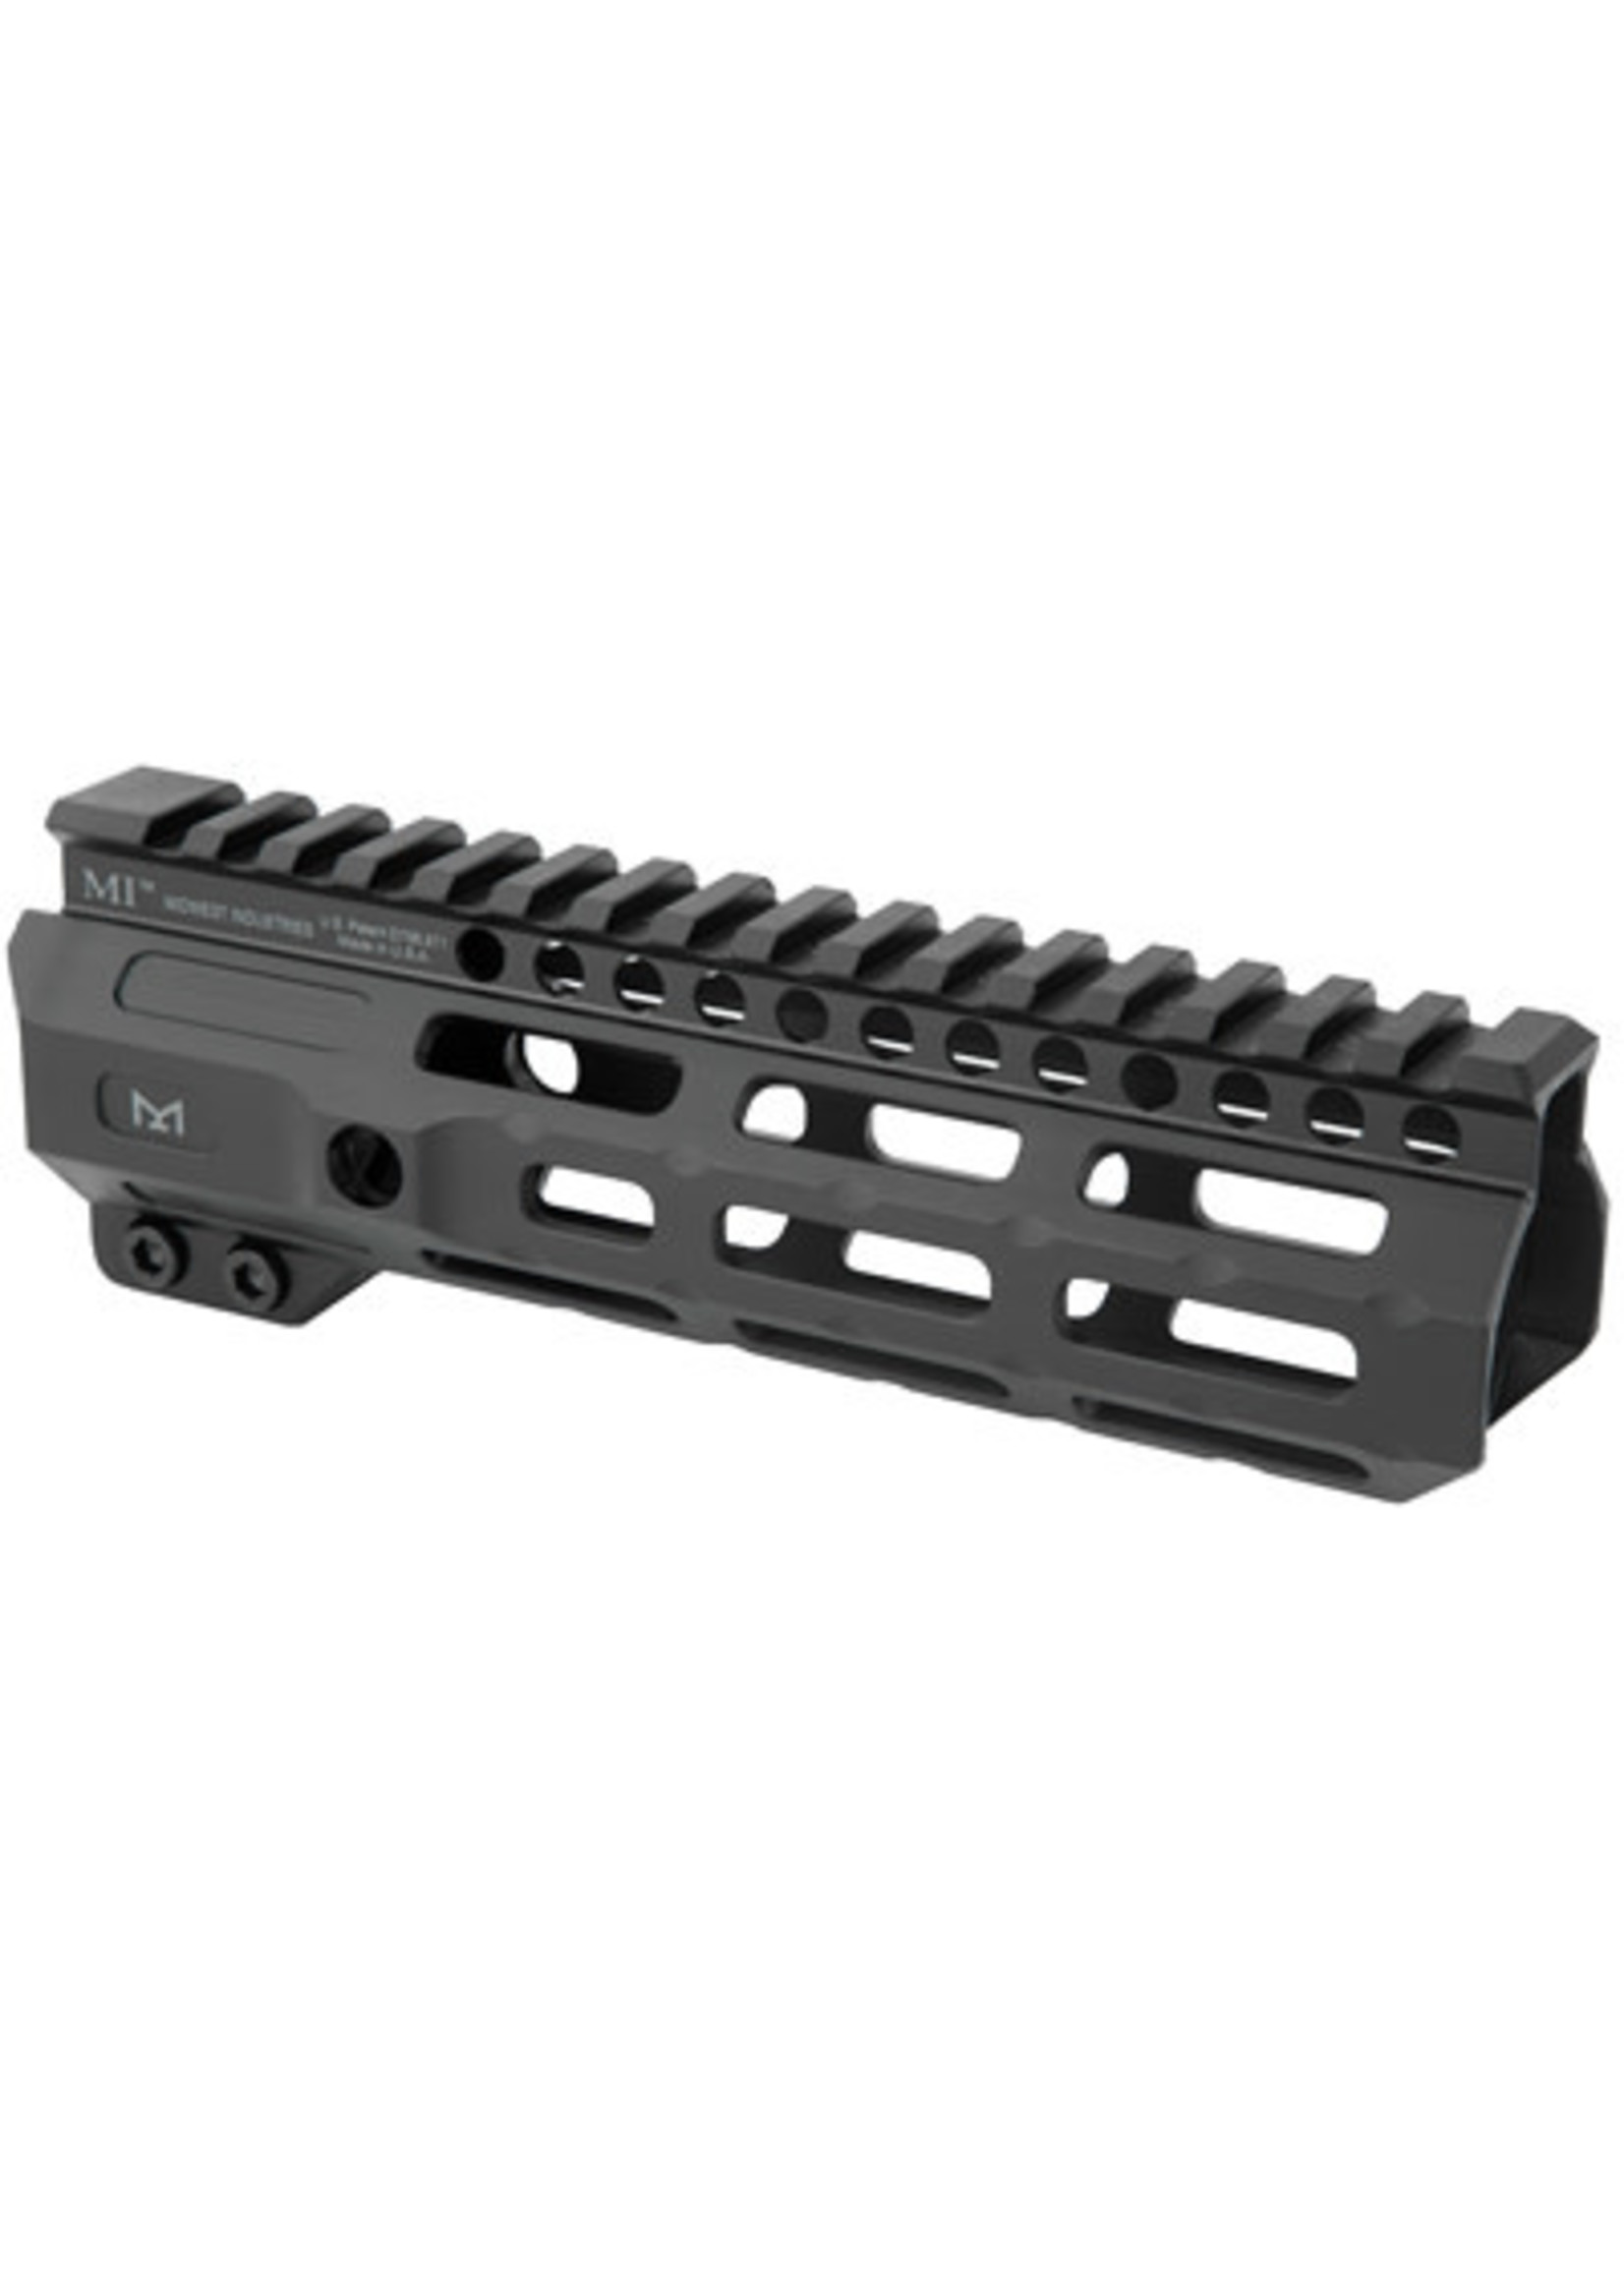 Magpul MFG Midwest Industries, Combat Rail M-LOK, Handguard, Fits AR-15 Rifles, 7" Wrench Included, Black